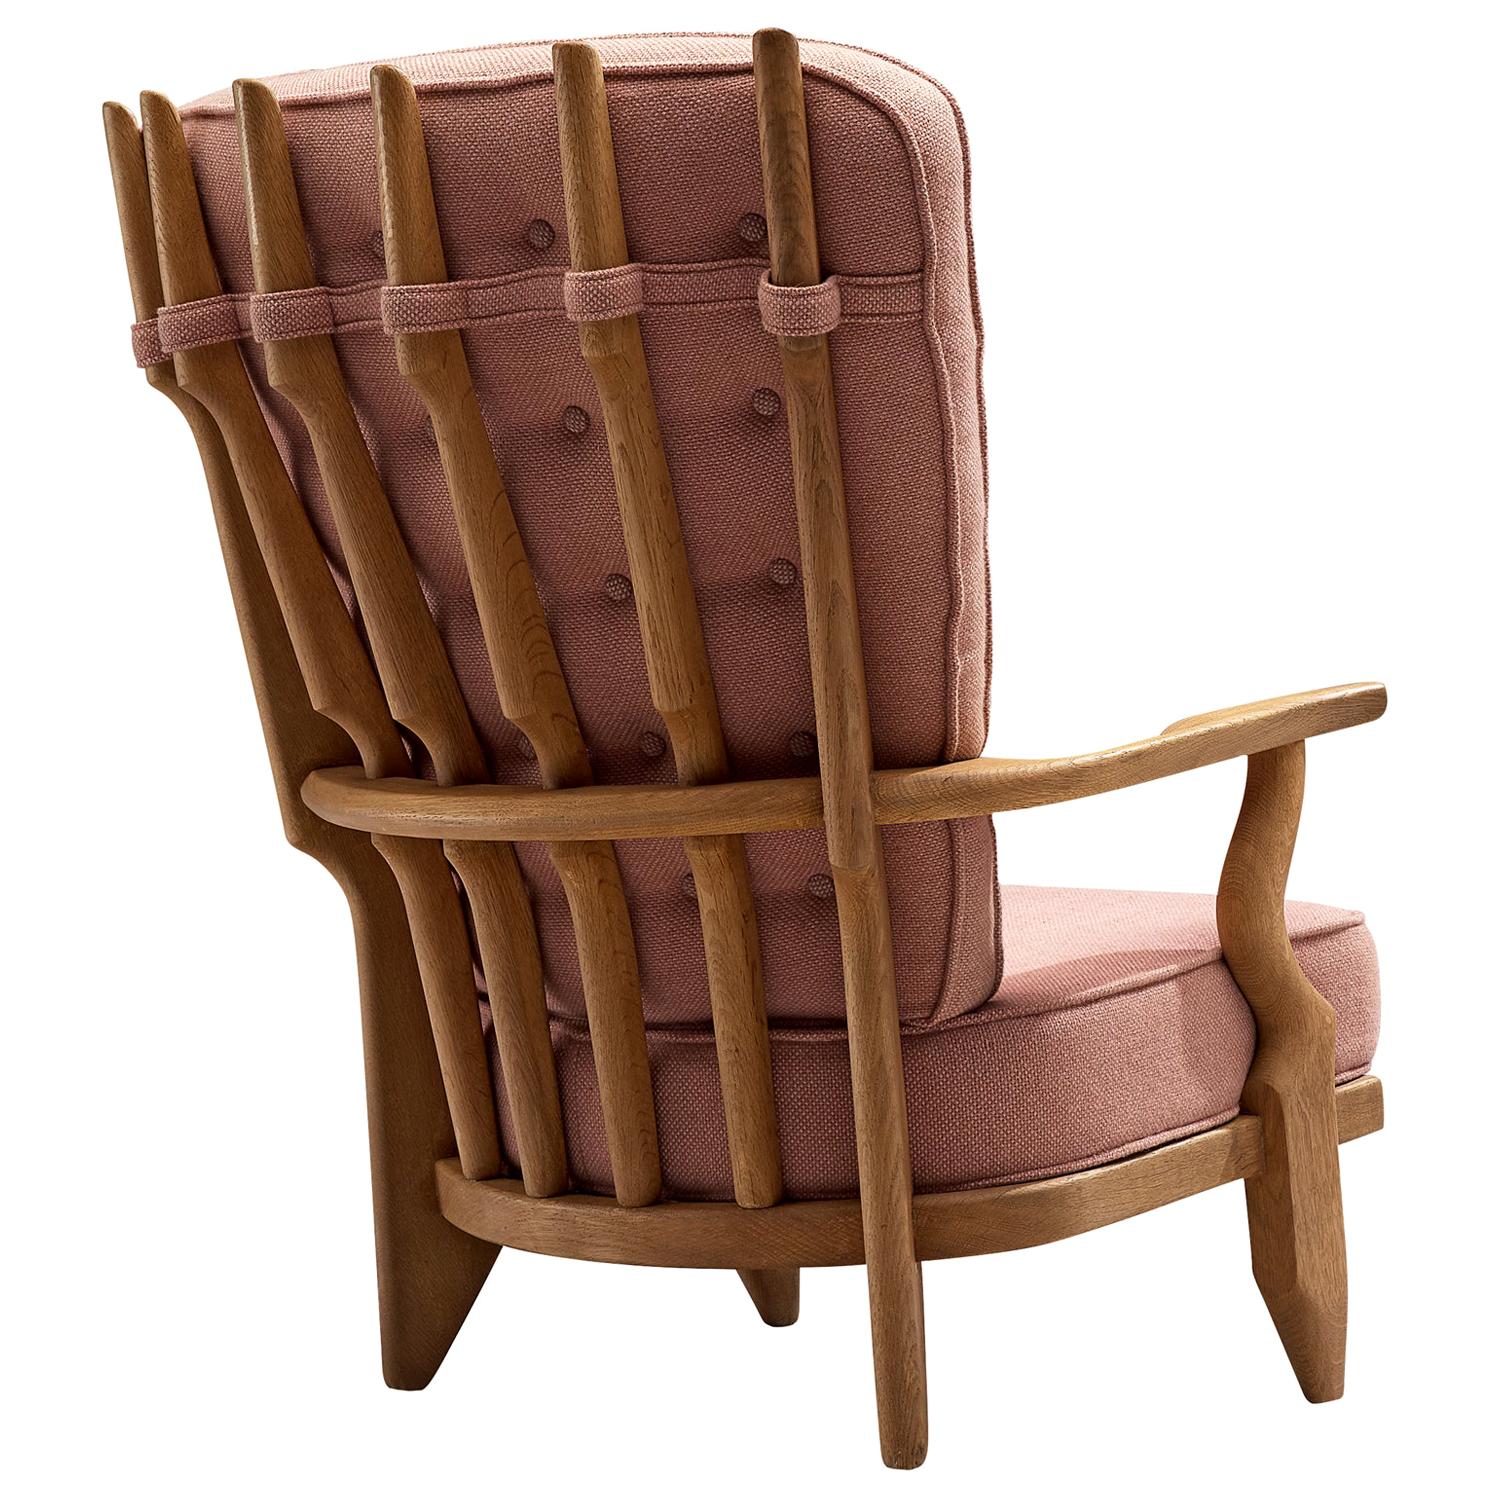 Guillerme et Chambron 'Grand Repos' Lounge Chair in Pink Fabric